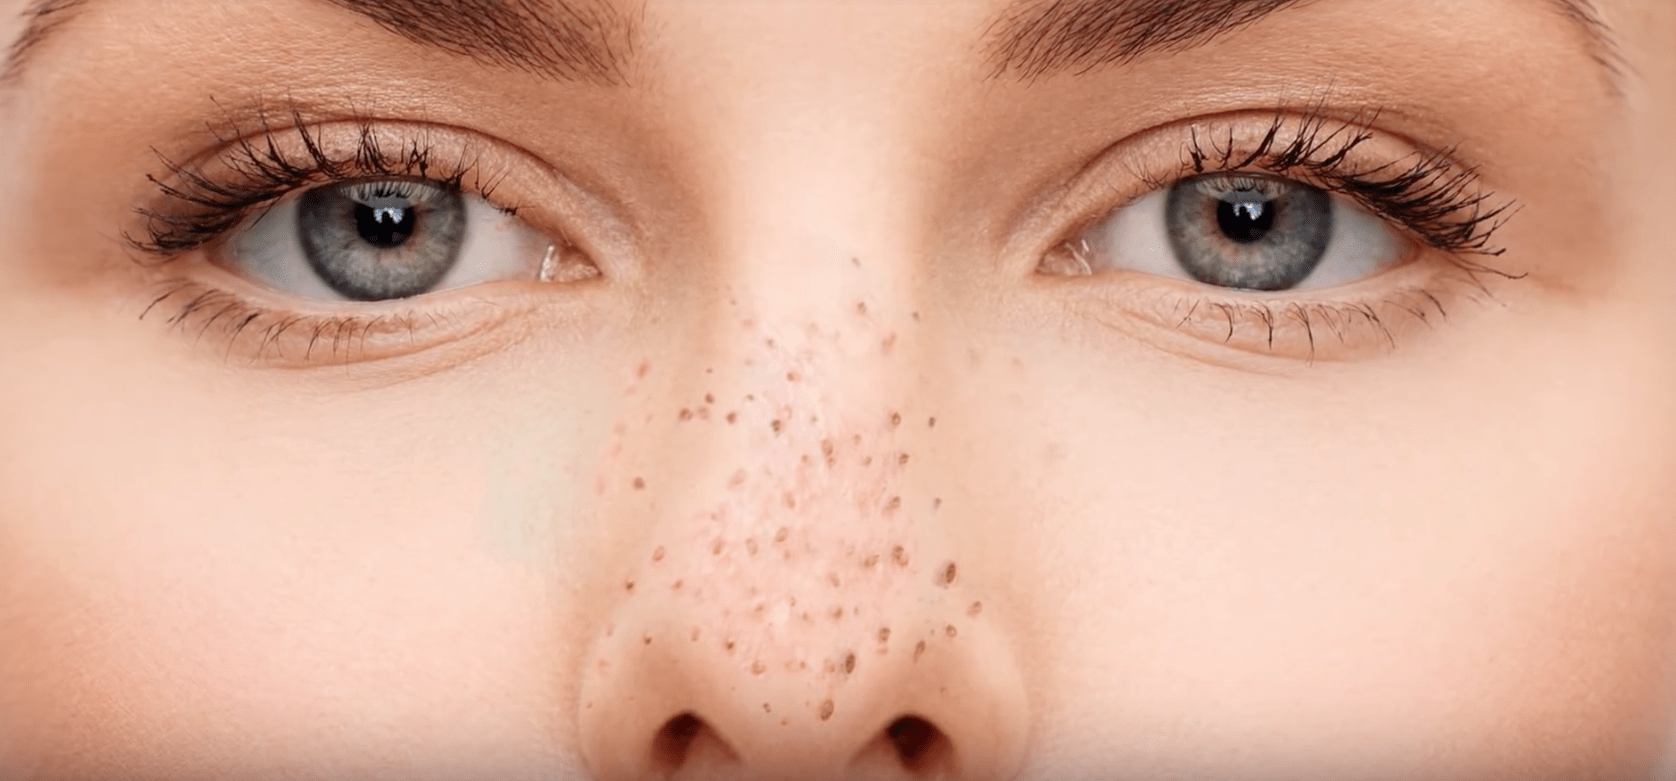 The Best Advice For Removing Blackheads From Your Nose - School Mum